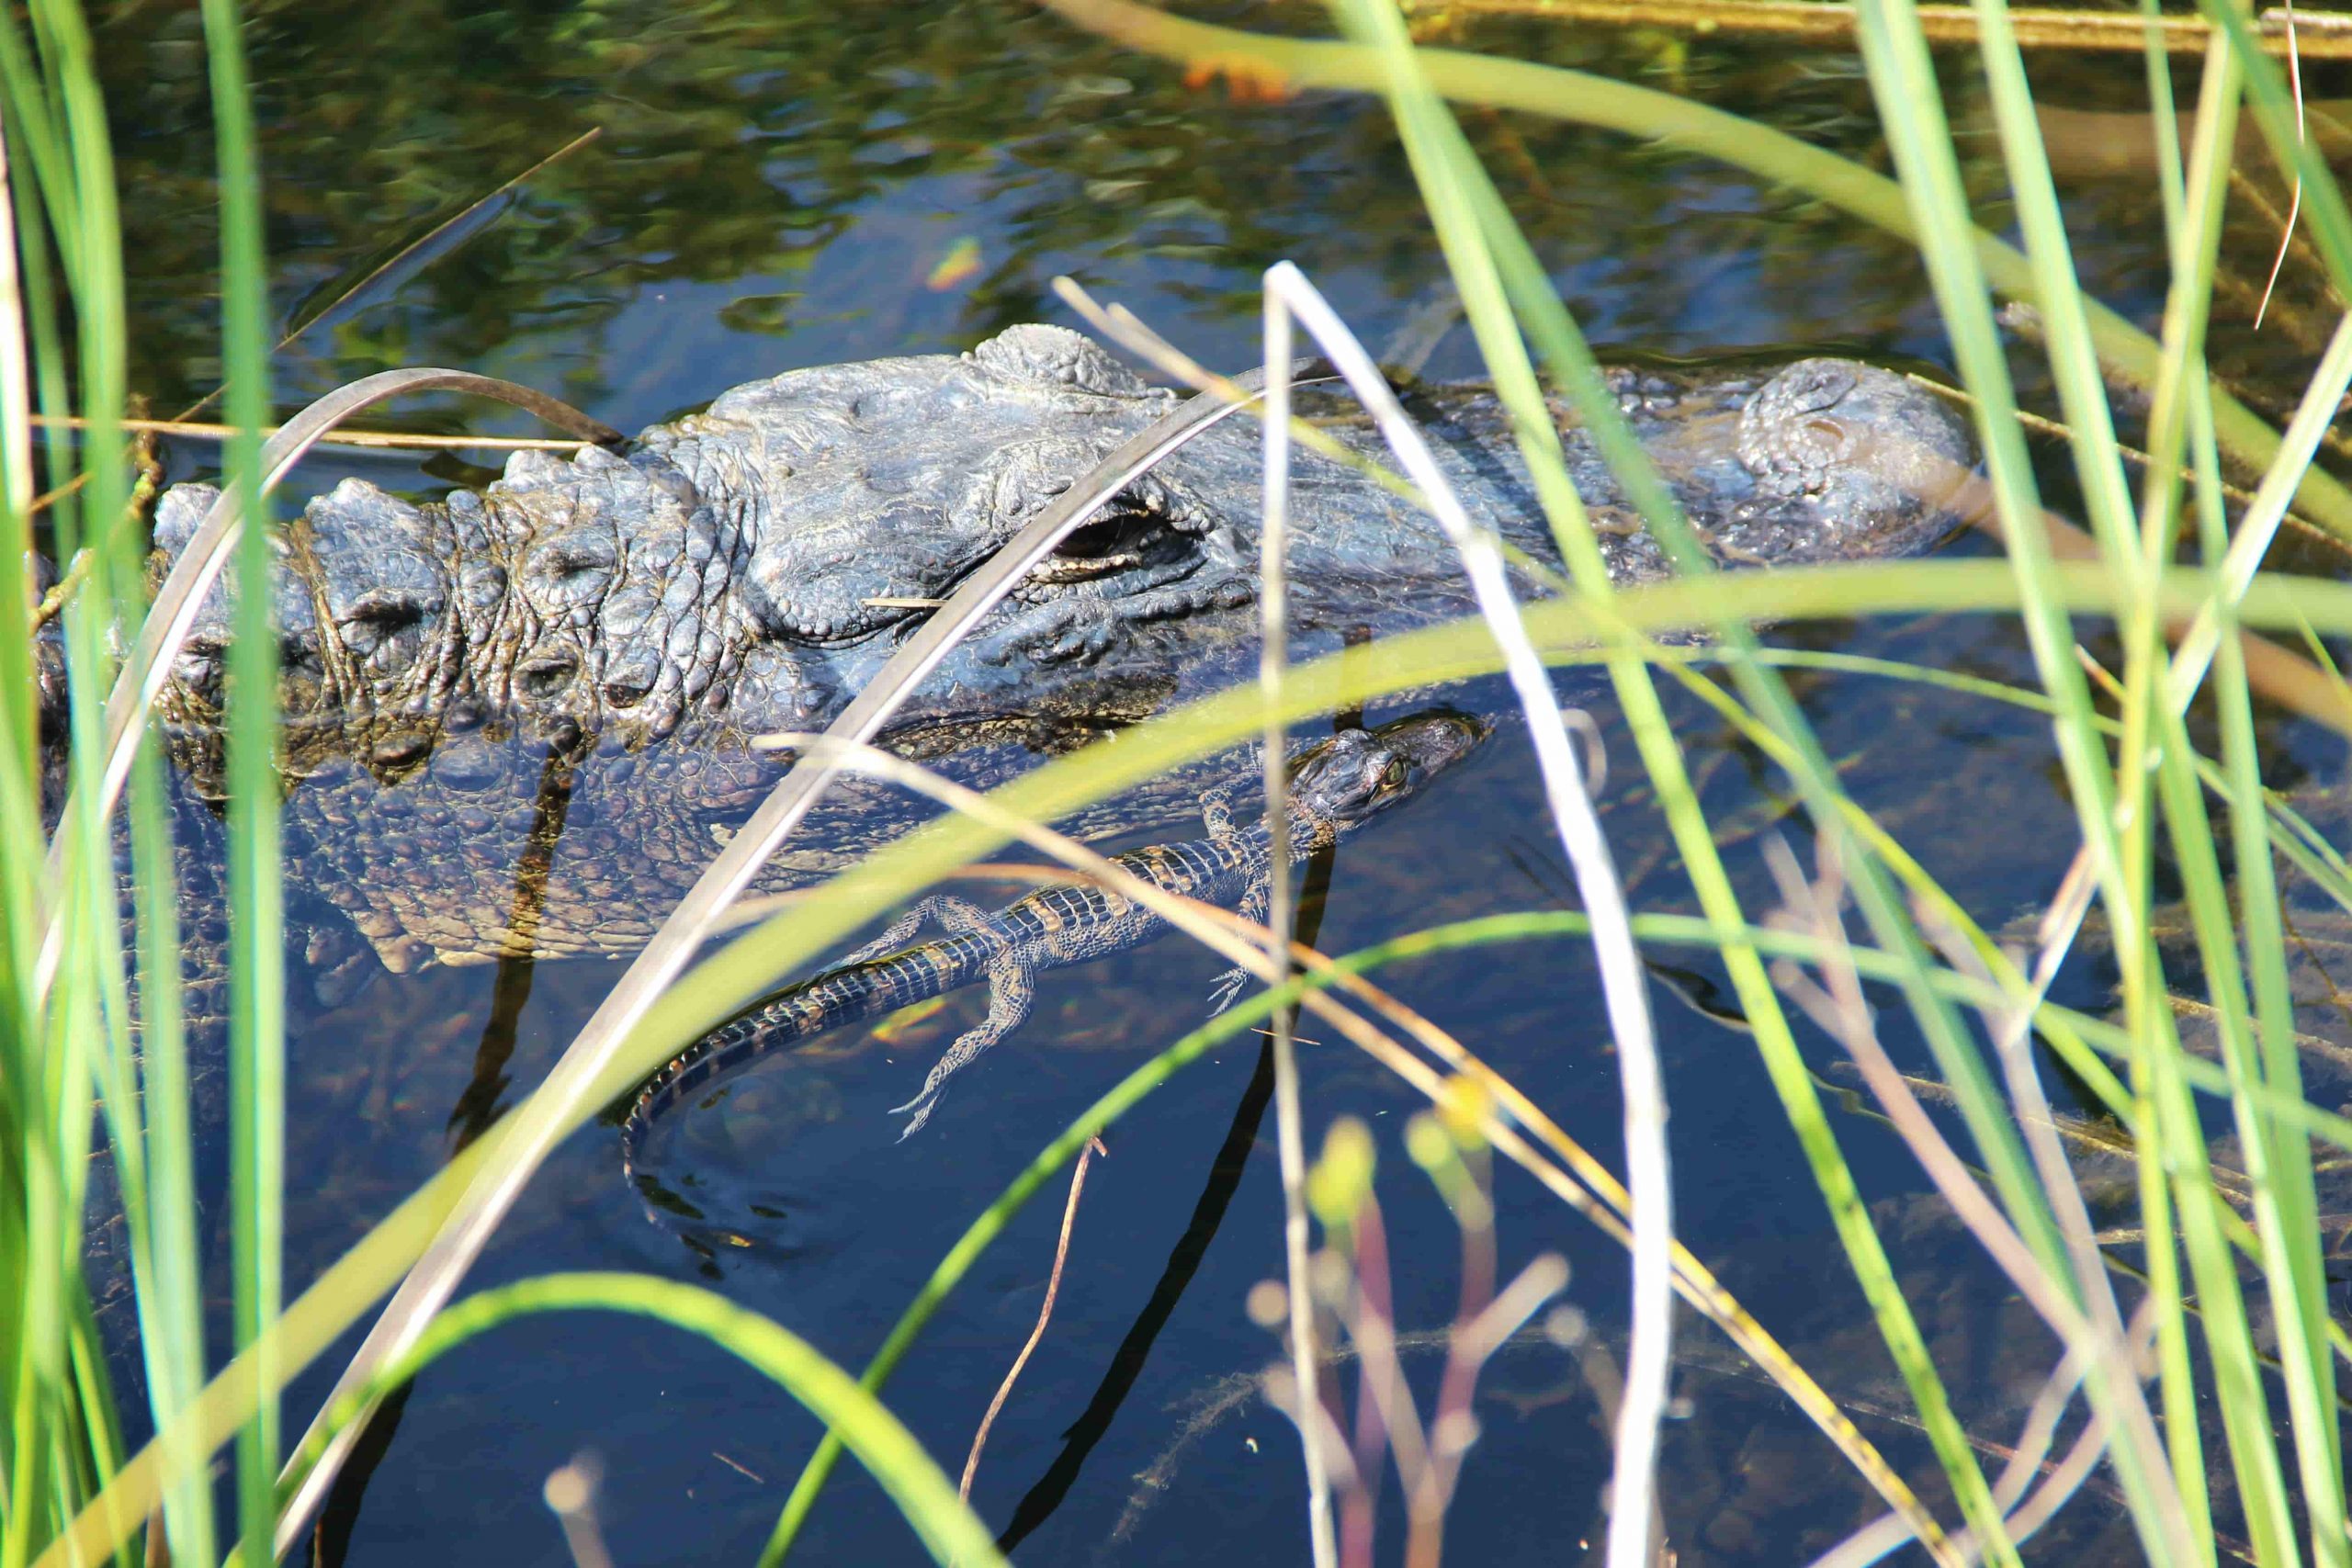 The Everglades is fun for all the family in Fort Lauderdale